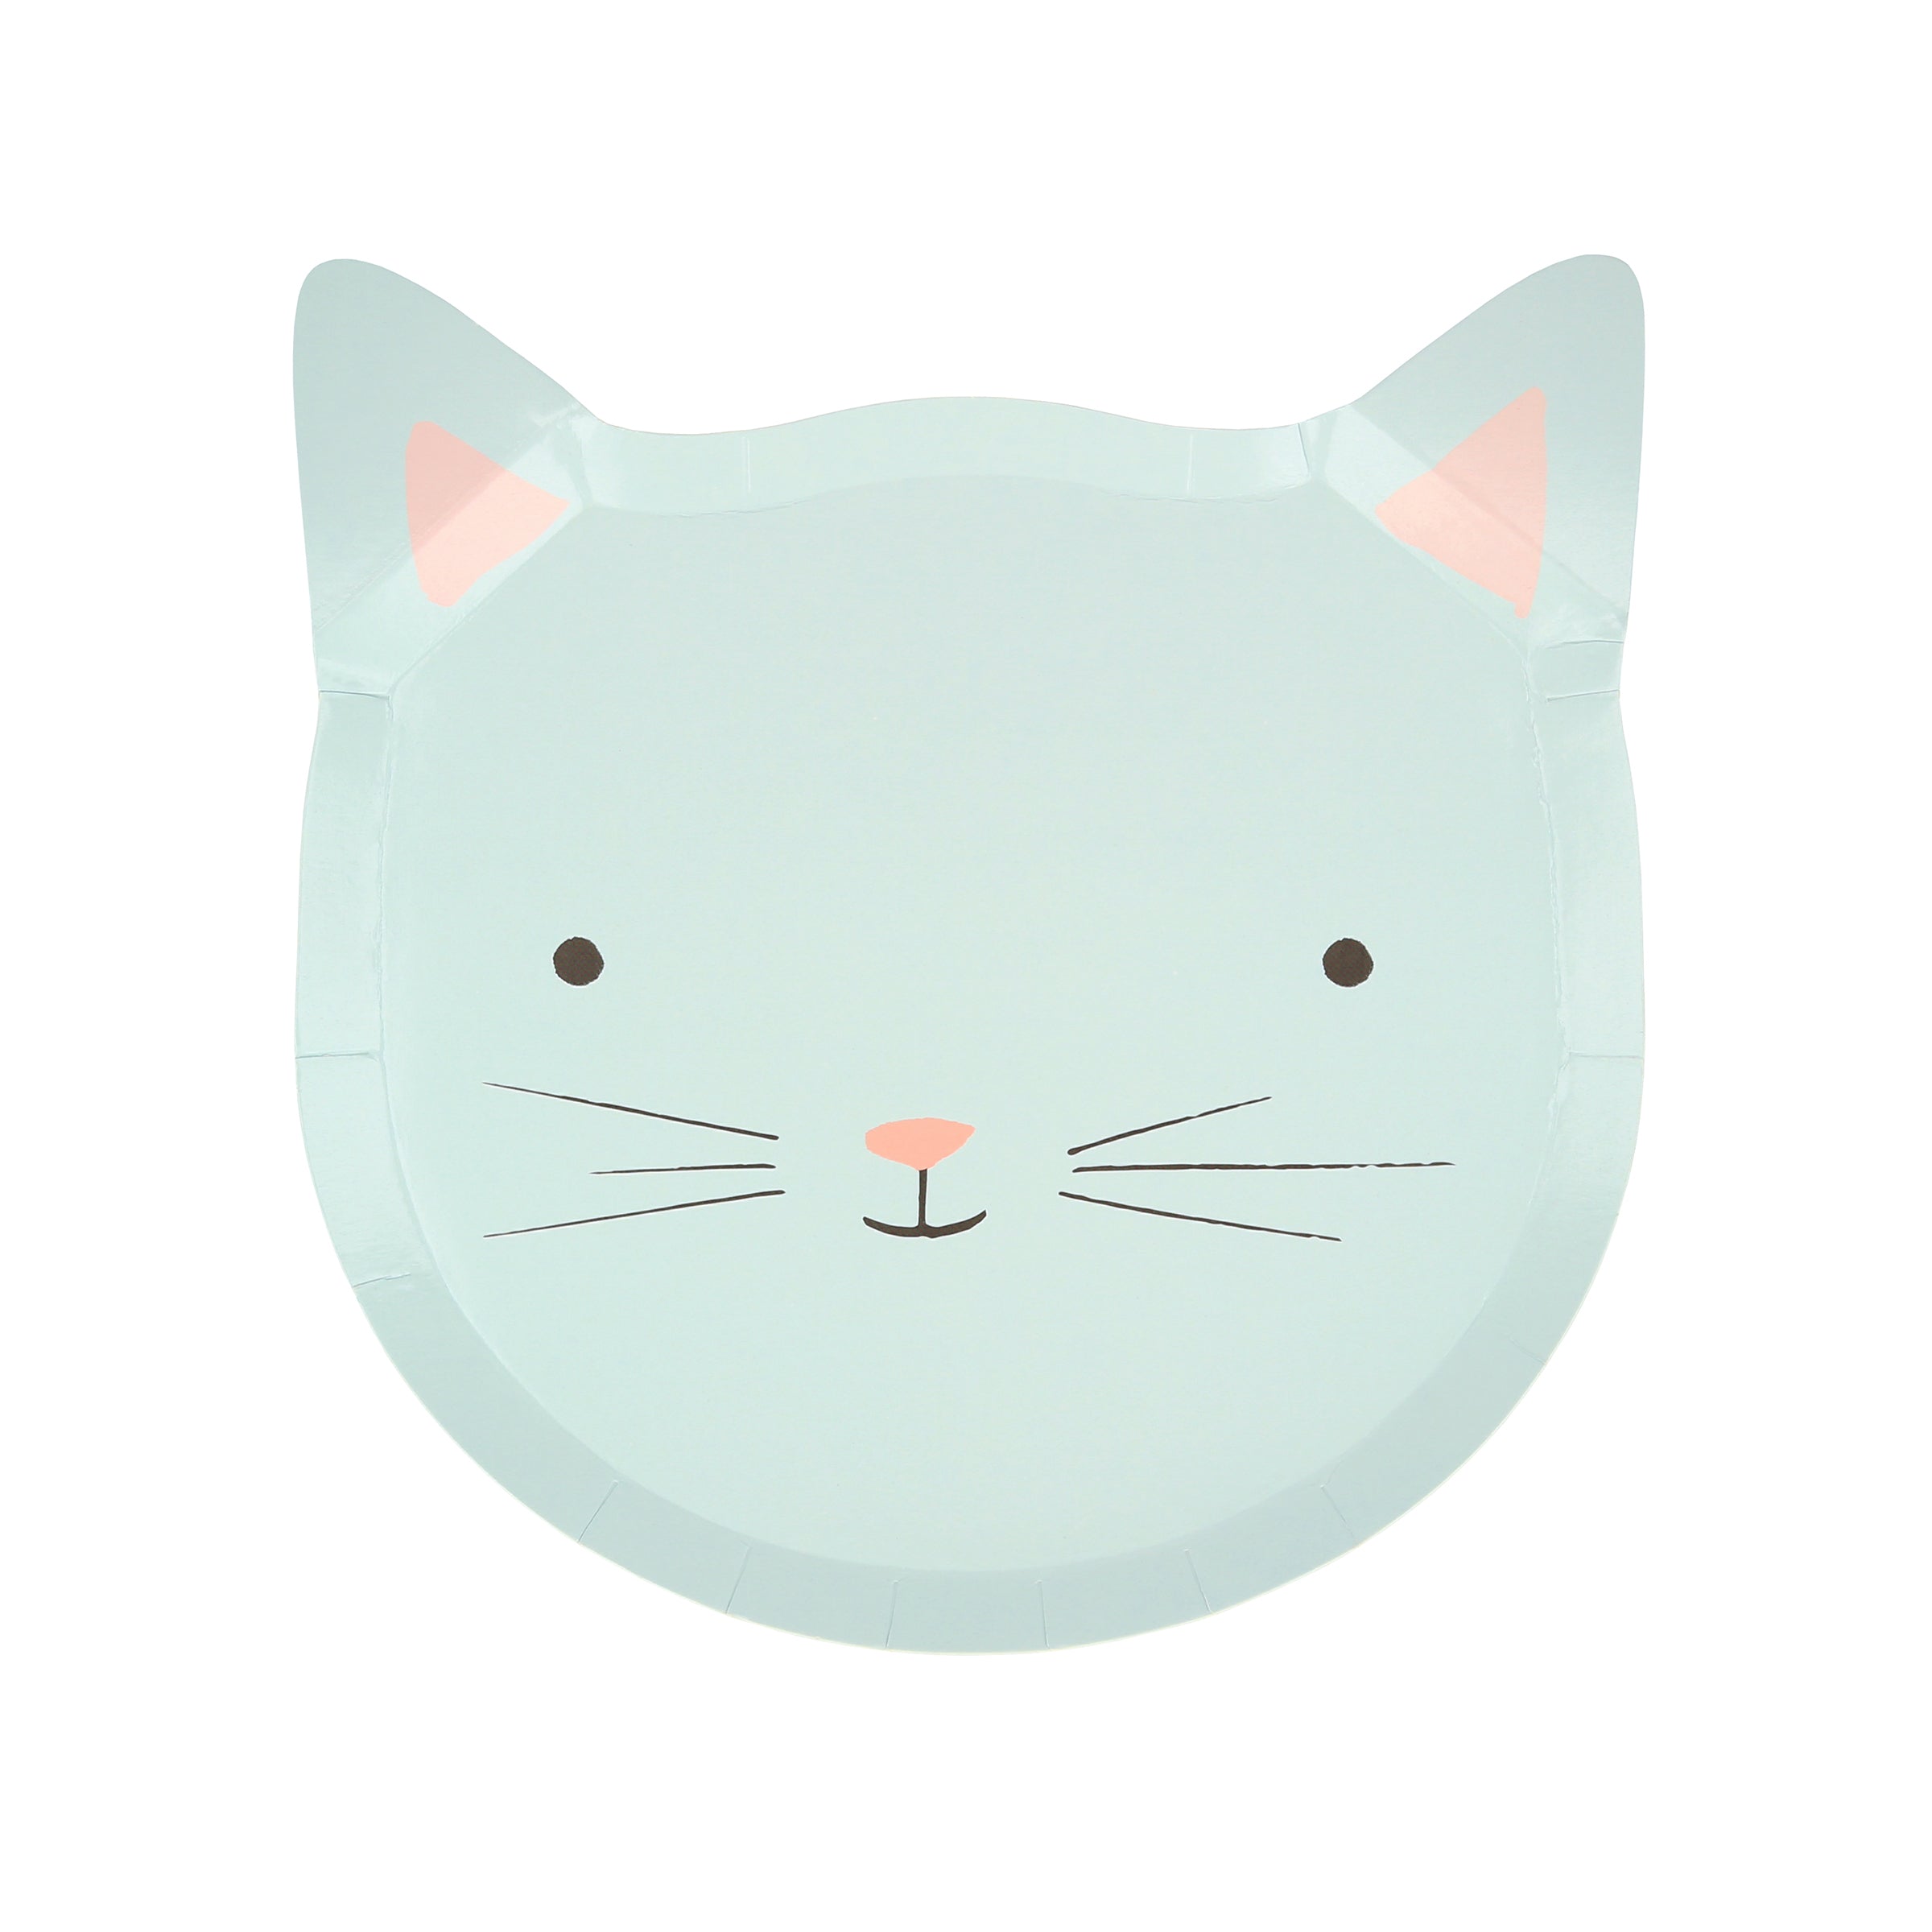 These pastel plates are perfect for kids plates, or for a cat birthday party.